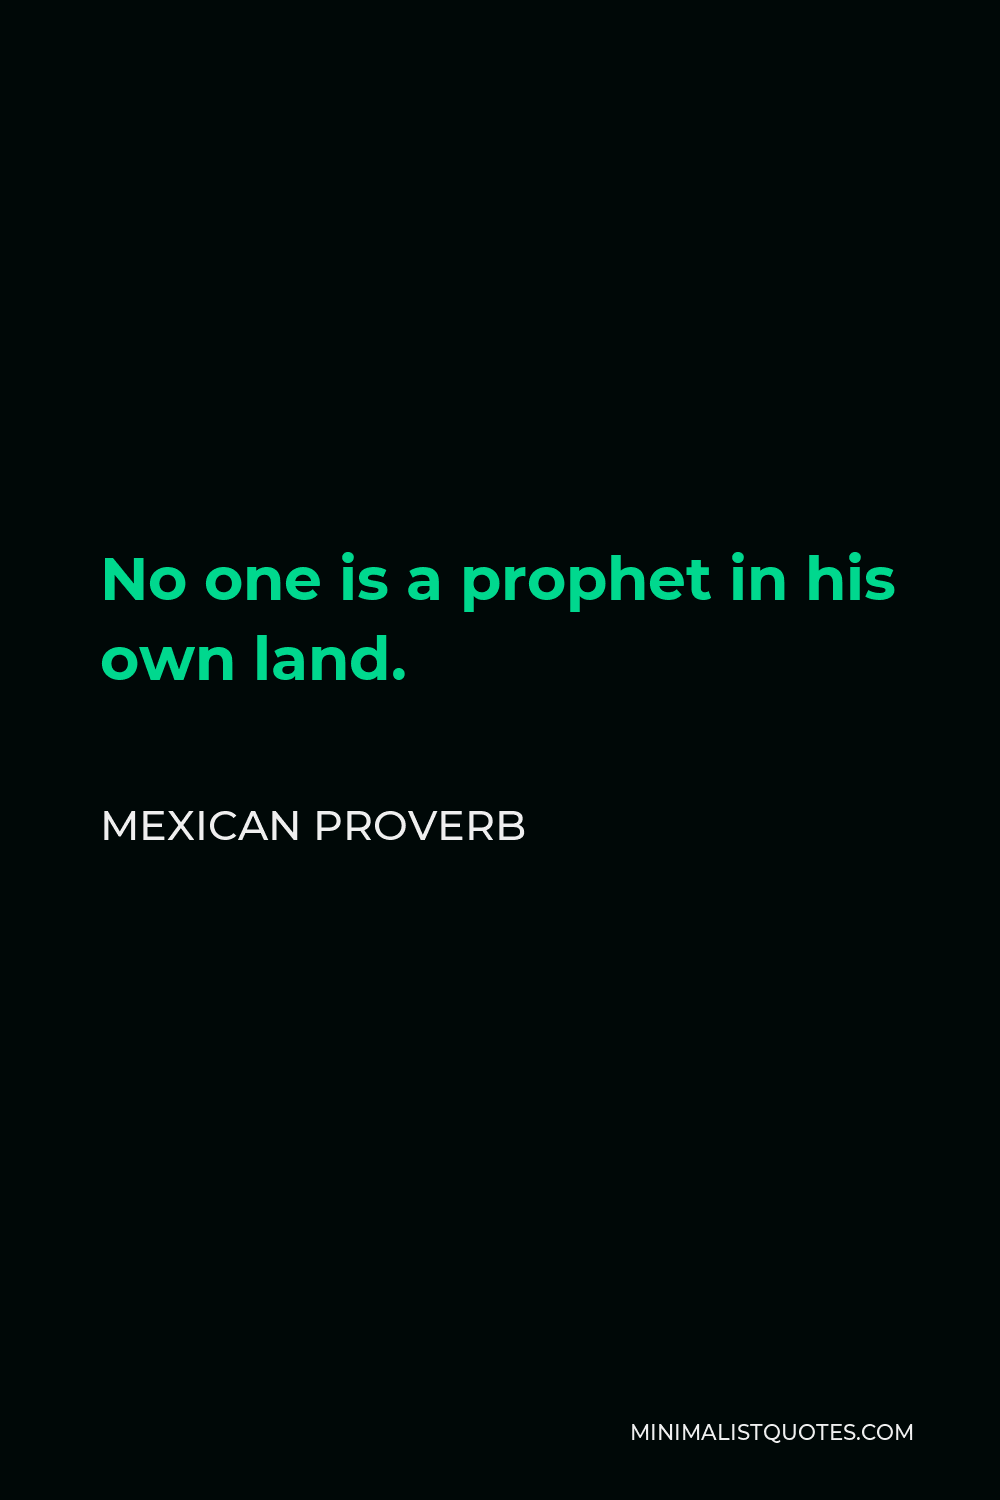 Mexican Proverb Quote - No one is a prophet in his own land.